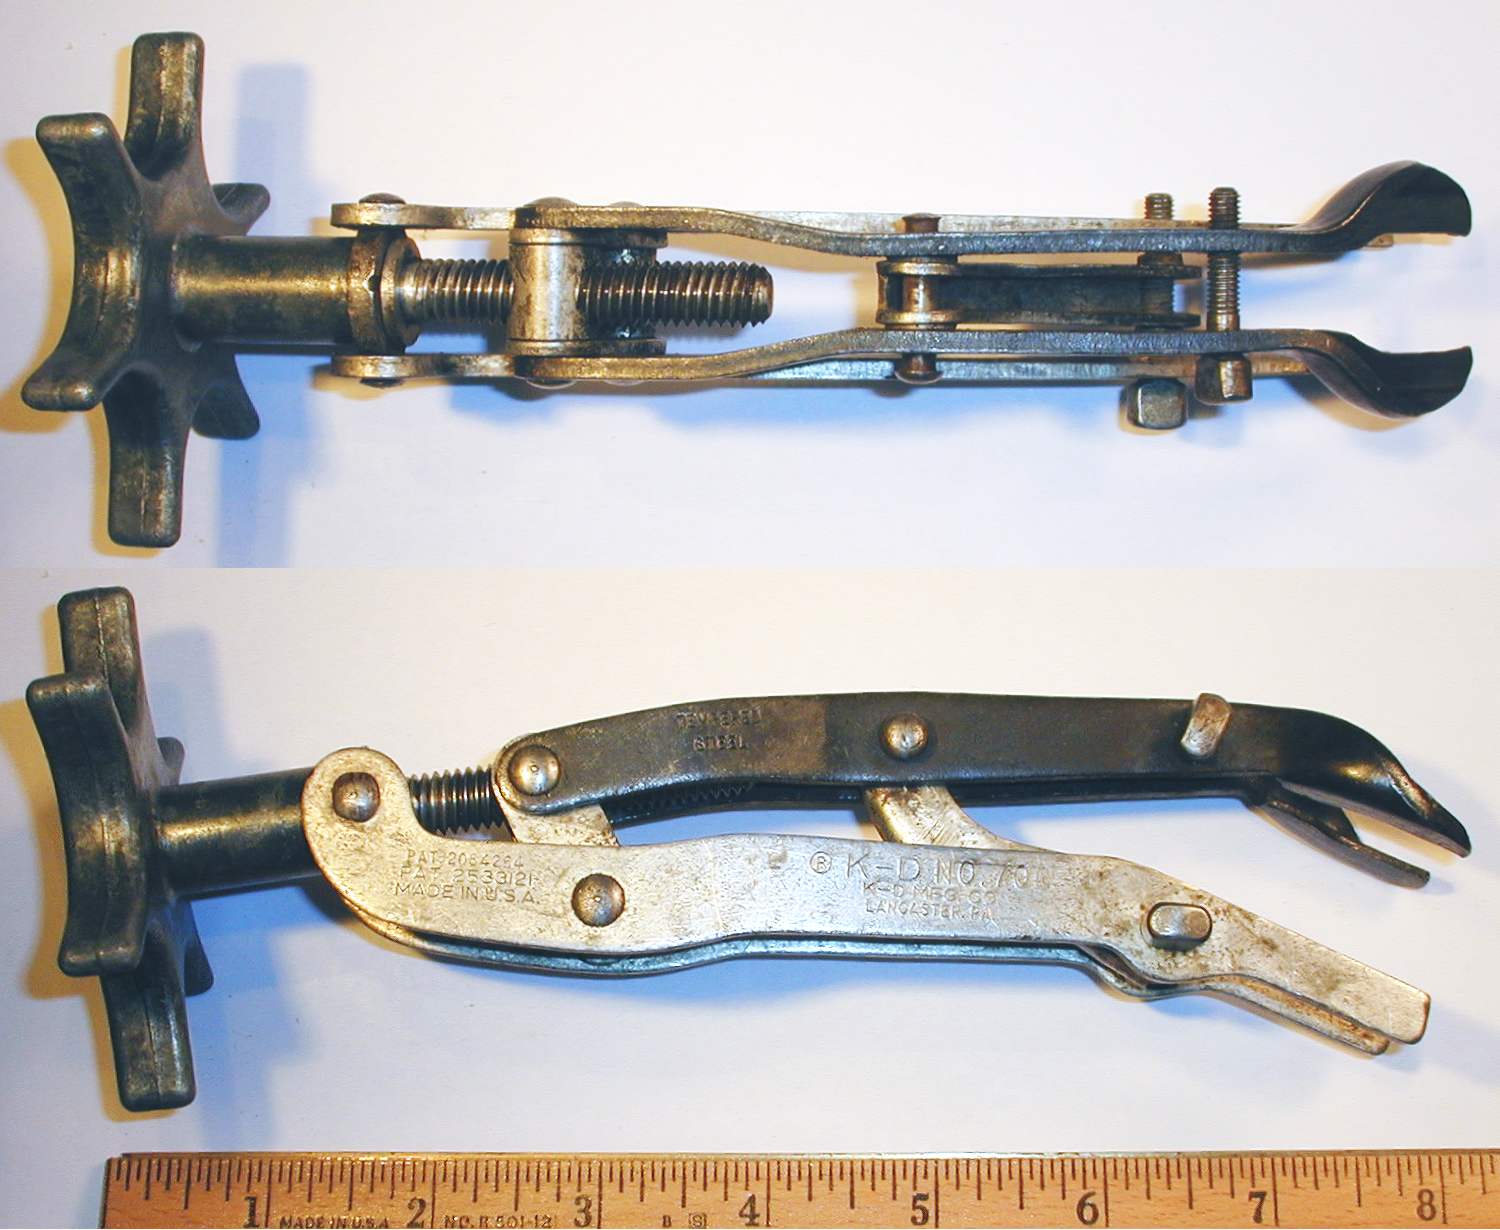 ETG107 Vintage K-D Manufacturing Co, Lancaster, PA Hand Tool. Old no. 135  Spark Plug Terminal Boot Pliers. Auto Tool Collectors -  UK